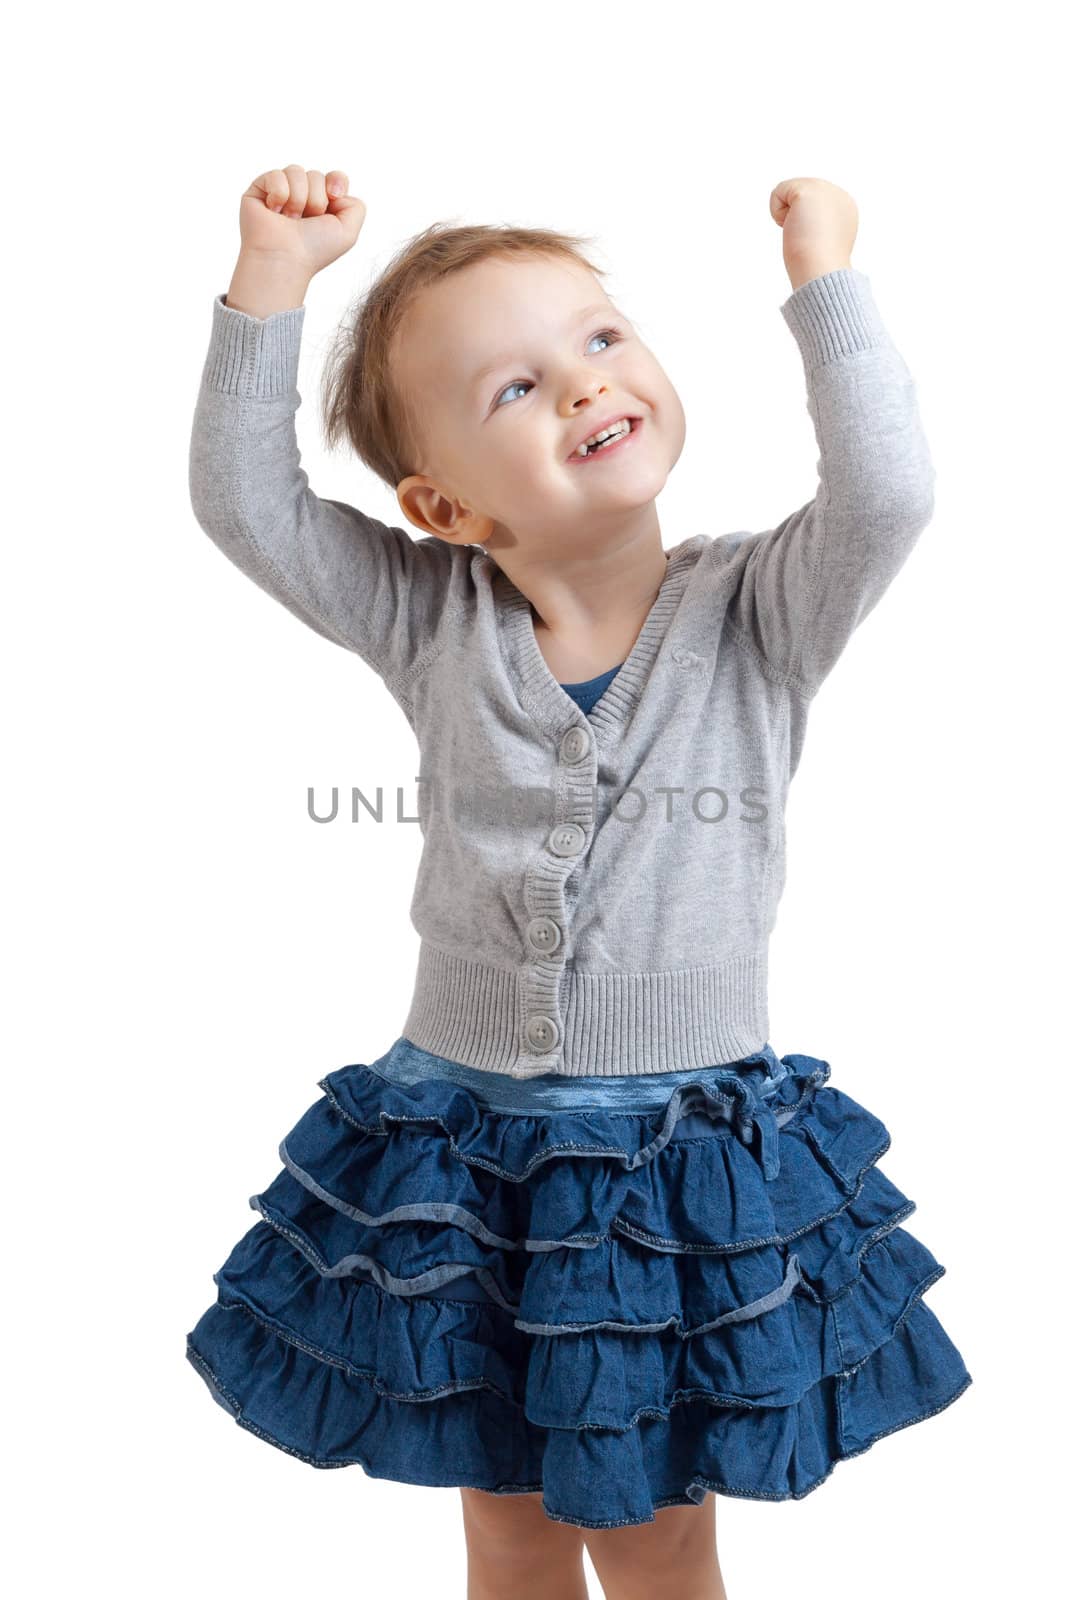 portrait of an smiling little blonde girl wearing a blue skirt holding up her hands - isolated on white background